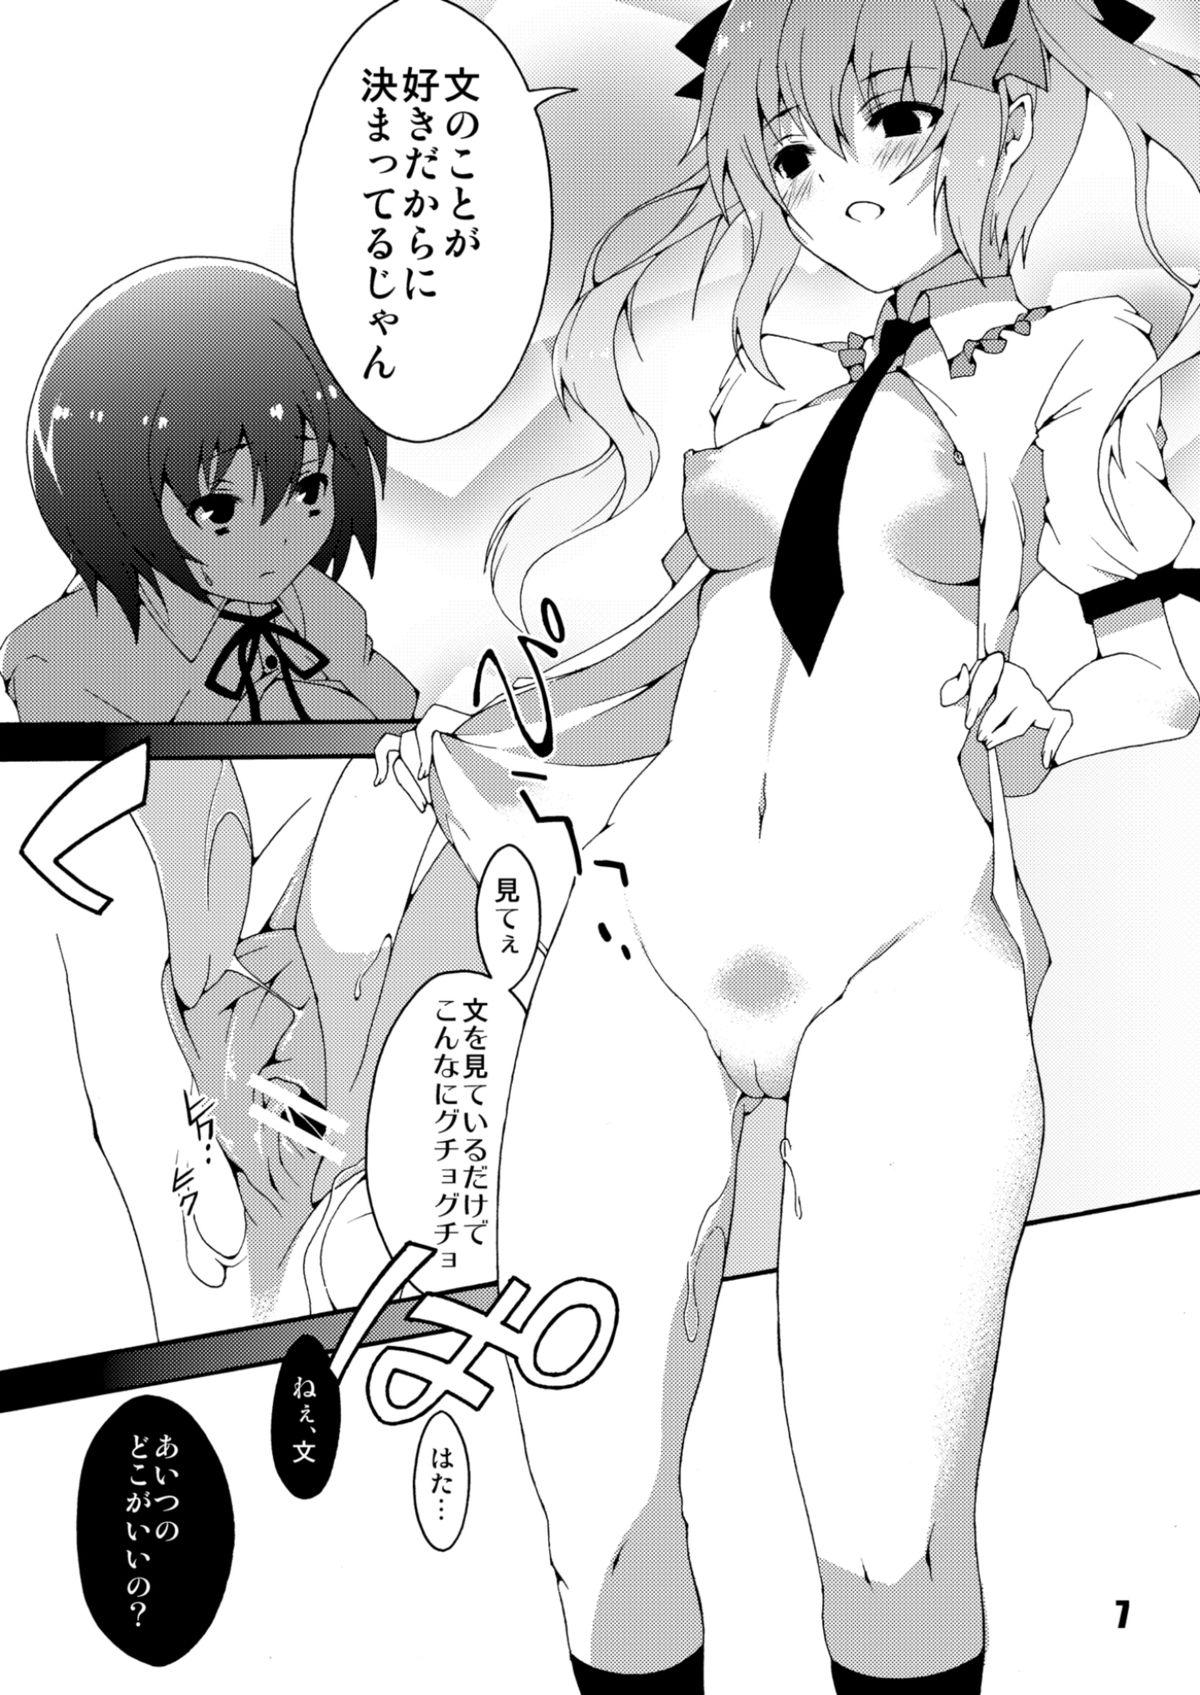 Pornstars Kanojo no Ryuugi There is no such thing as light. - Touhou project Adult Toys - Page 8